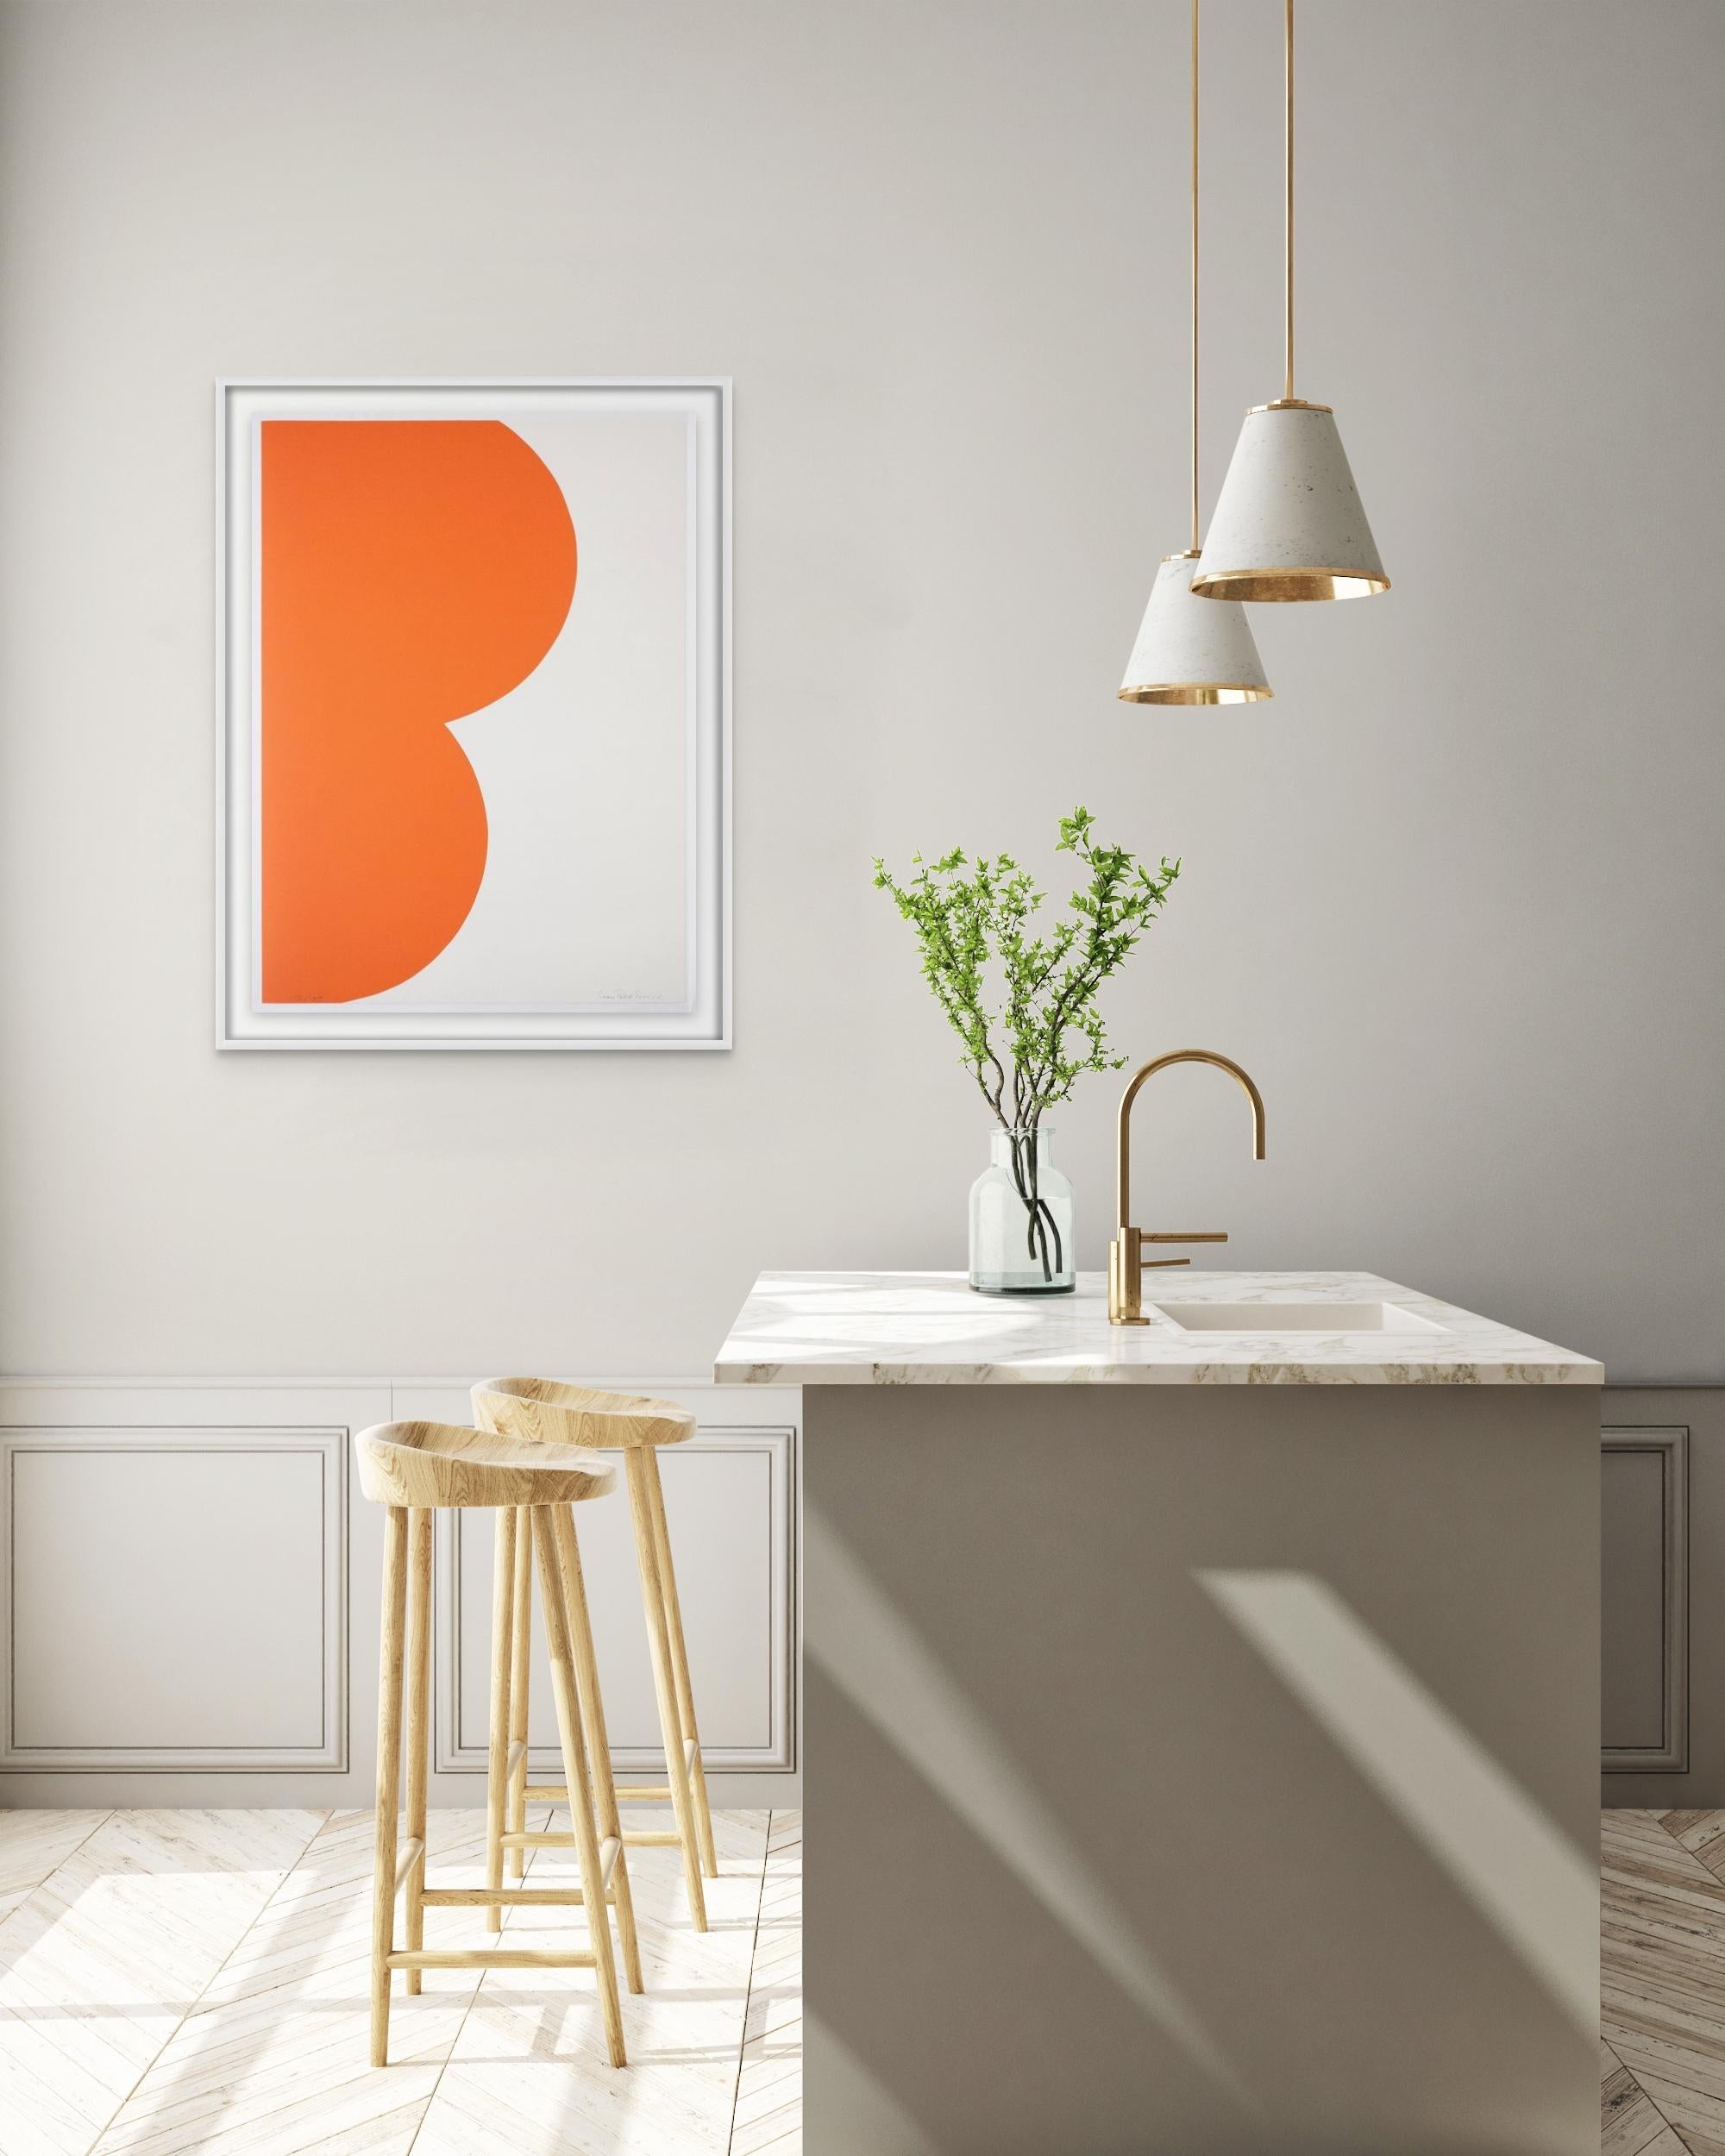 Color Forms (B) - Print by Leon Polk Smith